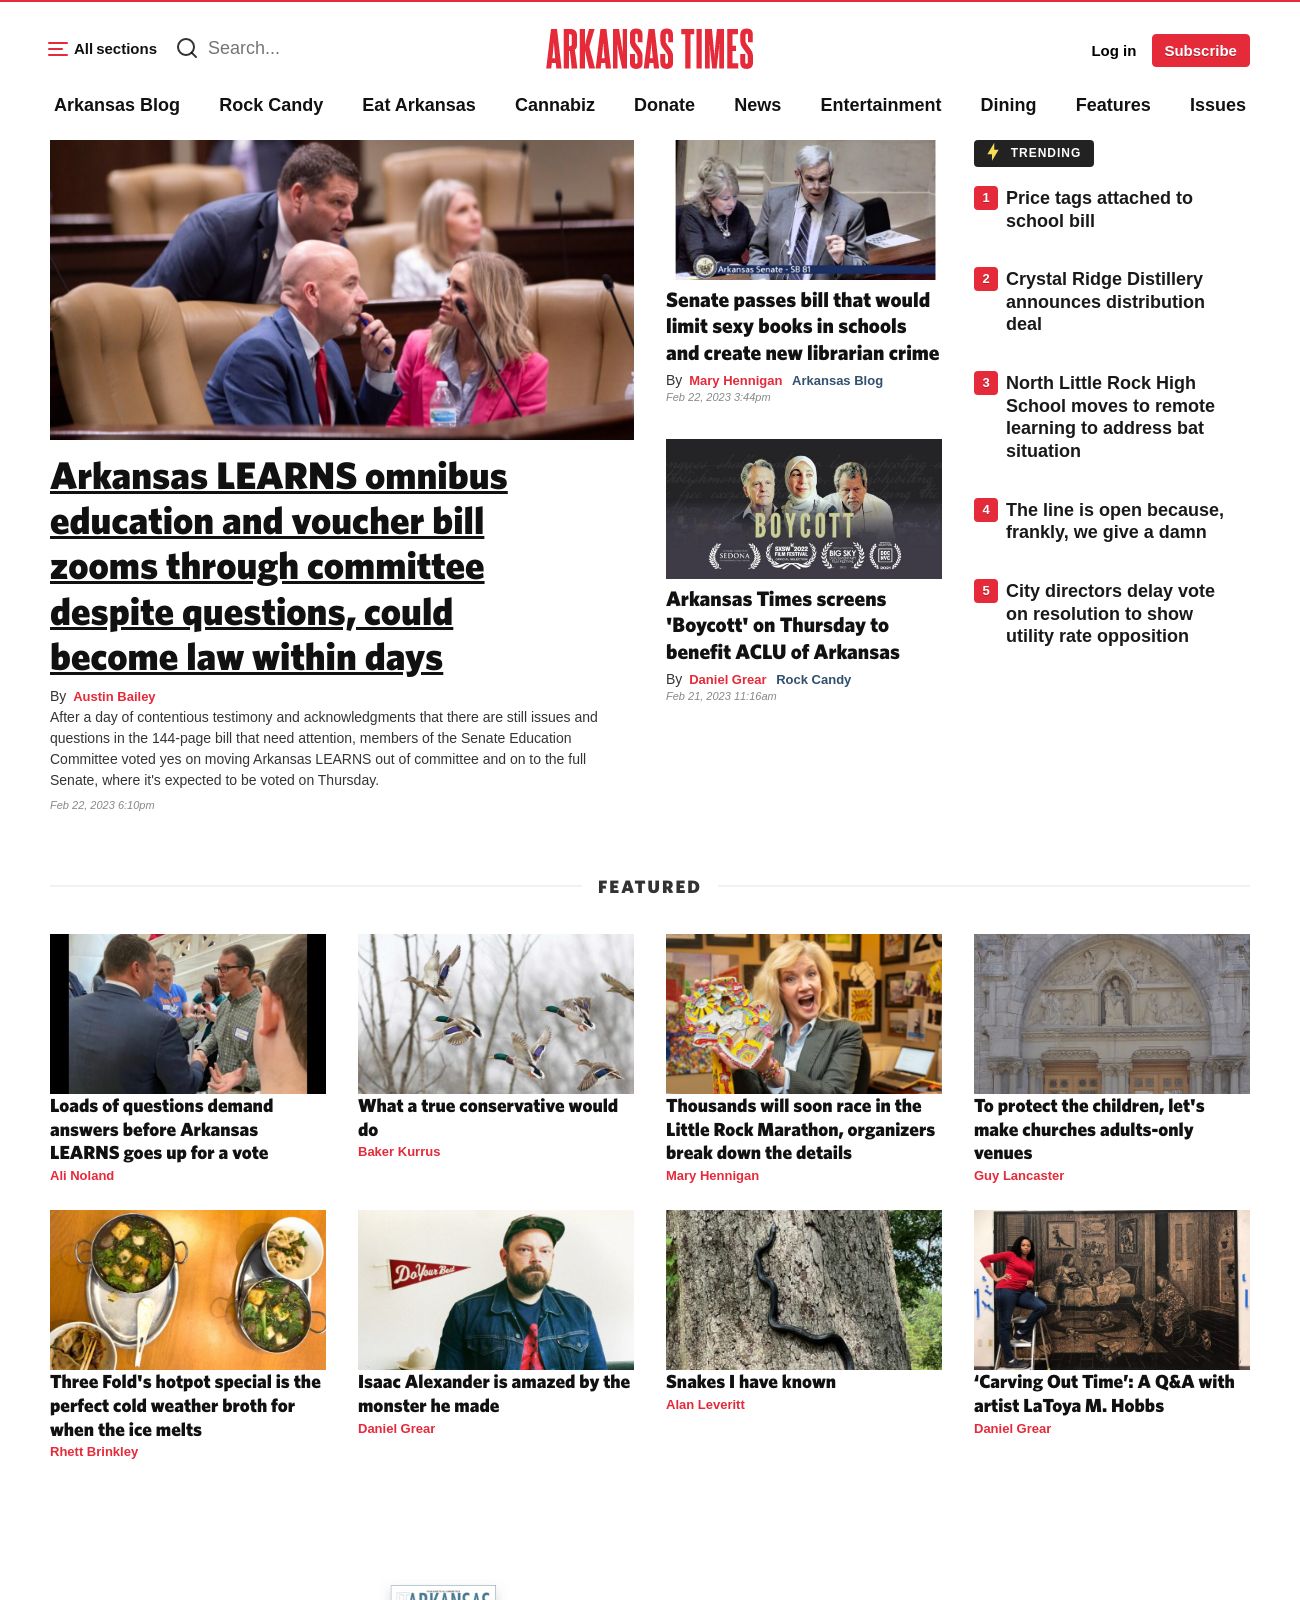 Arkansas Times at 2023-02-23 04:20:59-06:00 local time